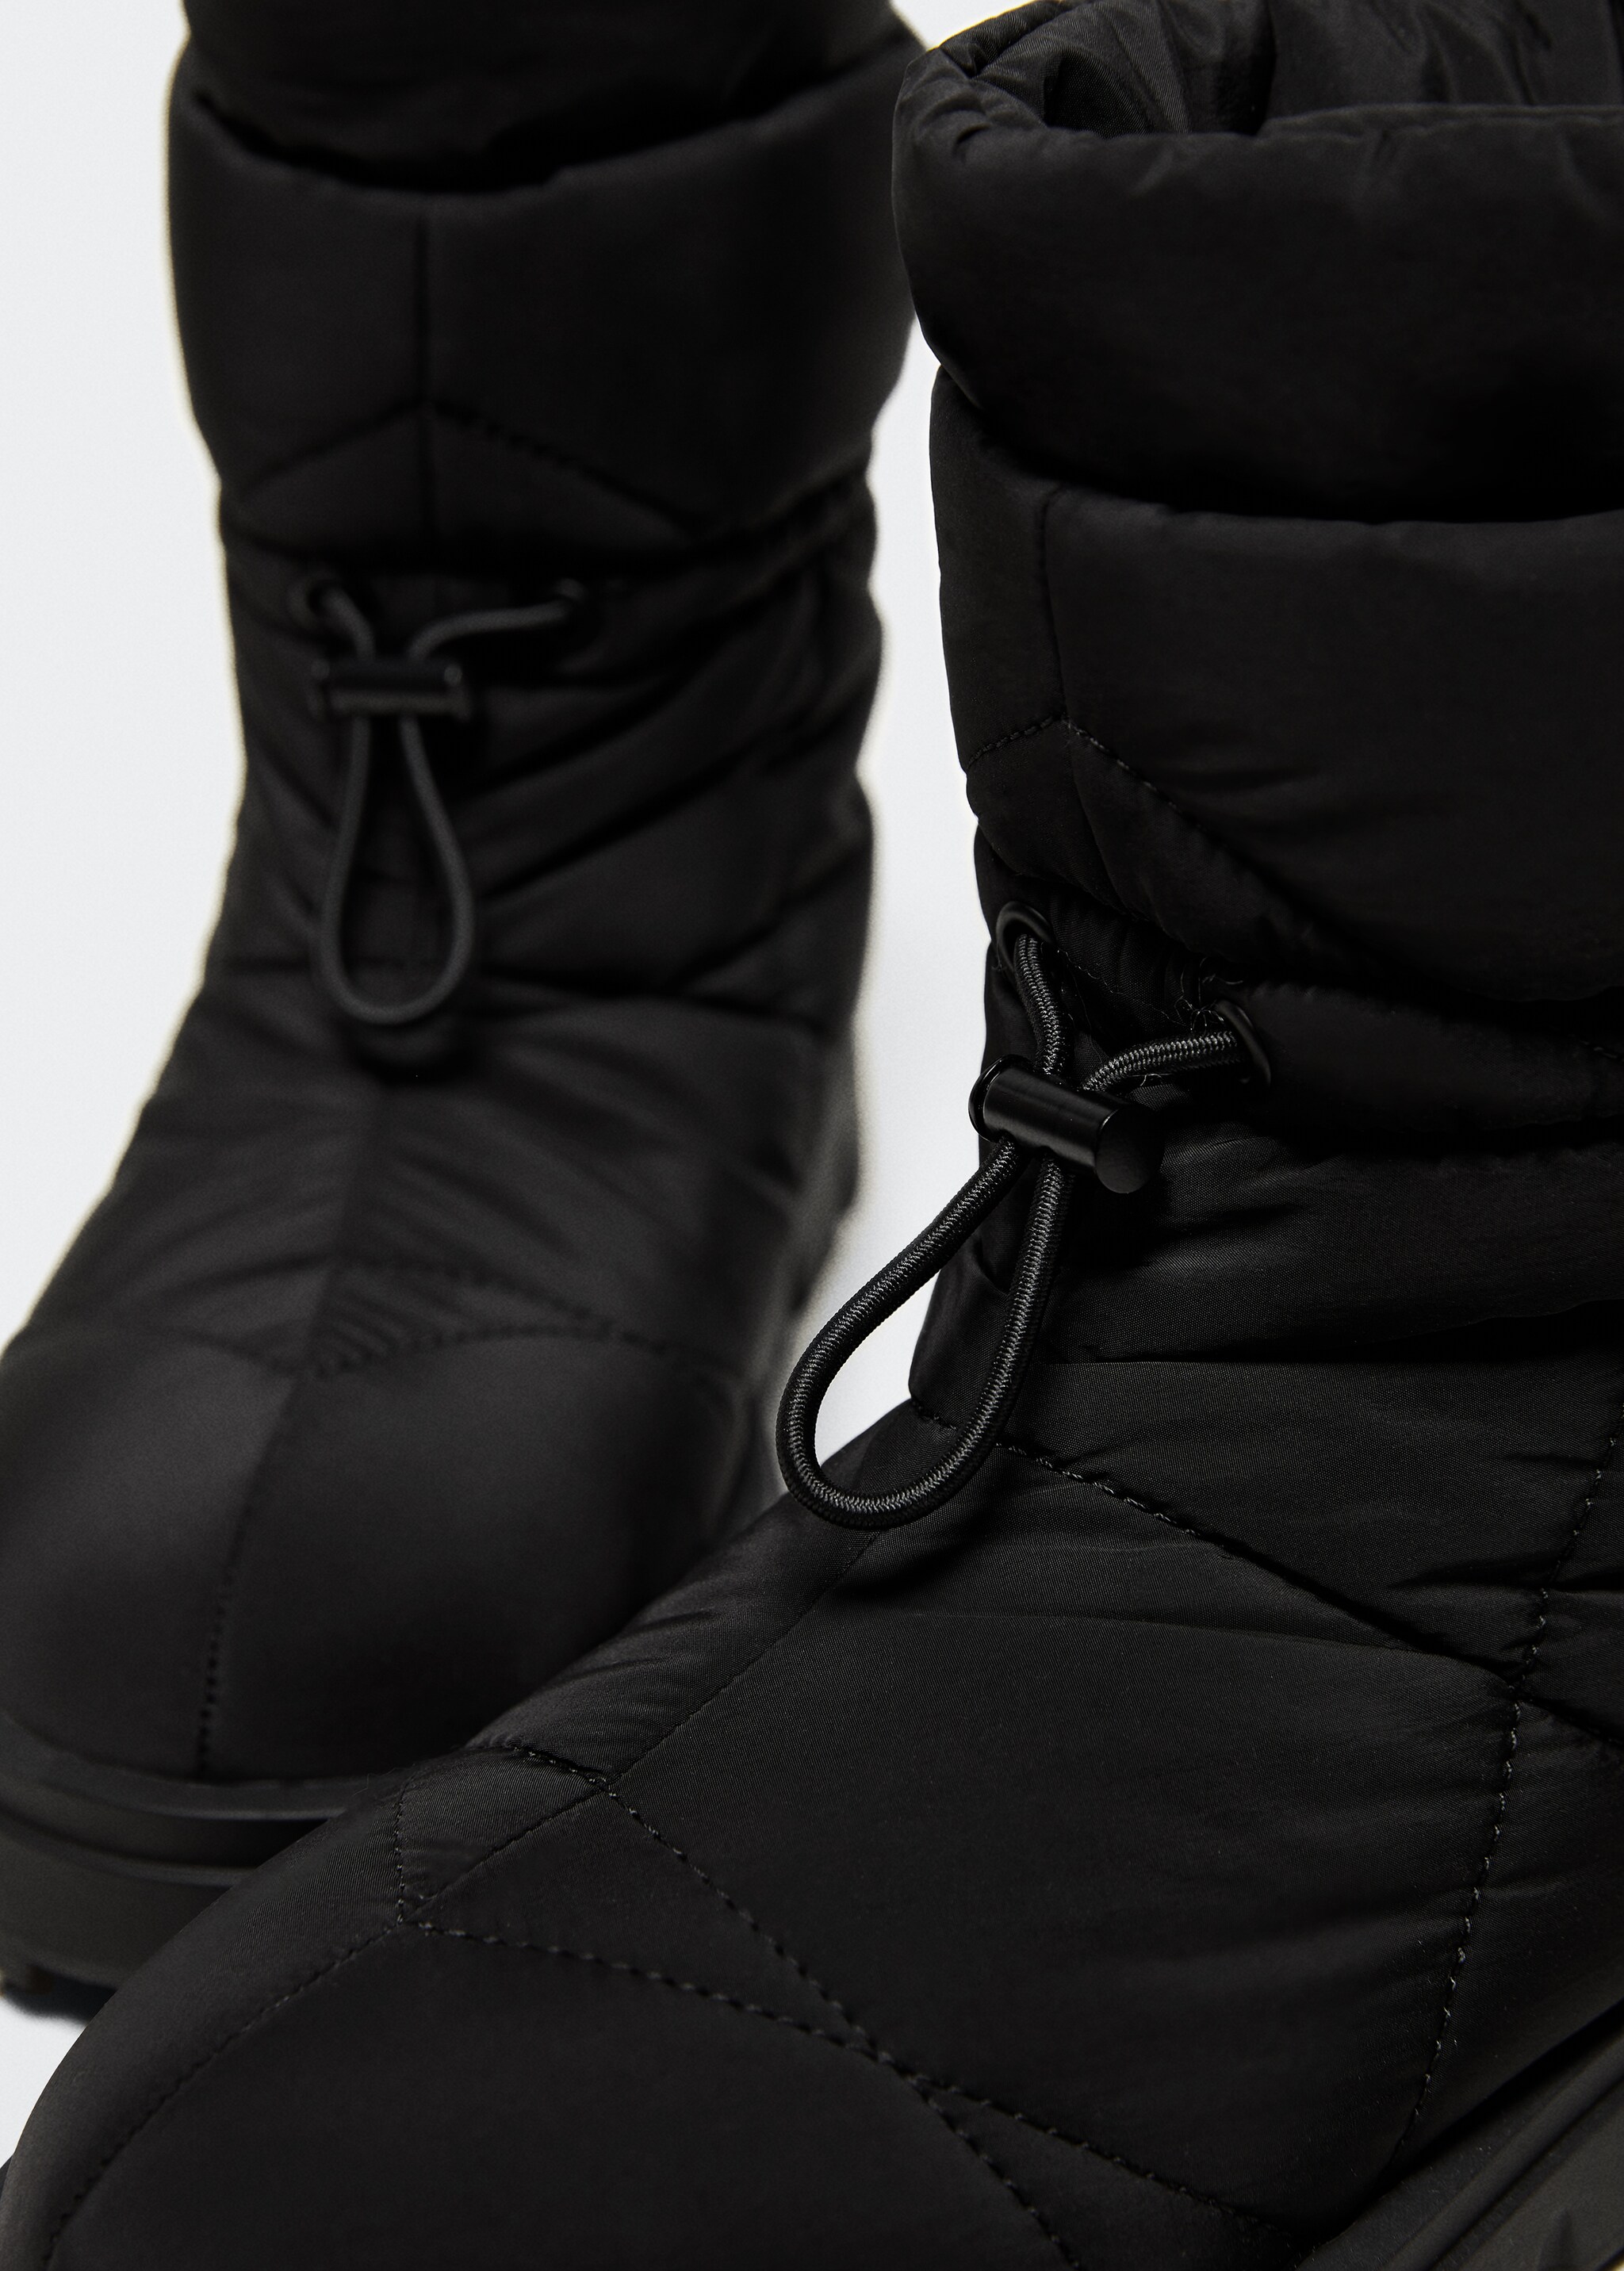 Padded boot with track sole - Details of the article 1